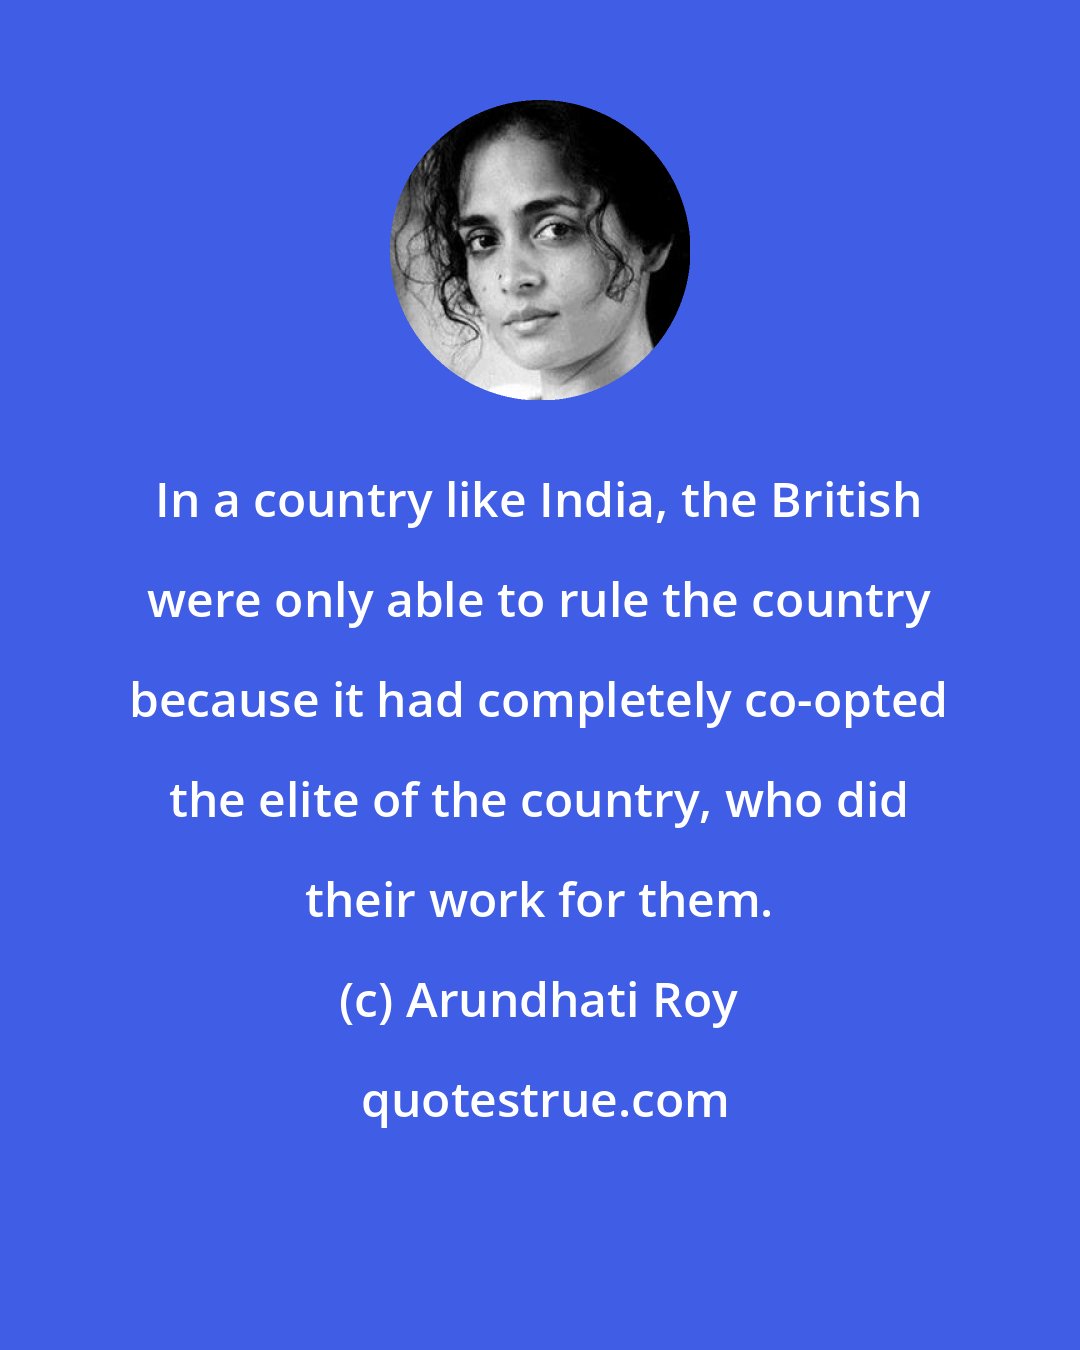 Arundhati Roy: In a country like India, the British were only able to rule the country because it had completely co-opted the elite of the country, who did their work for them.